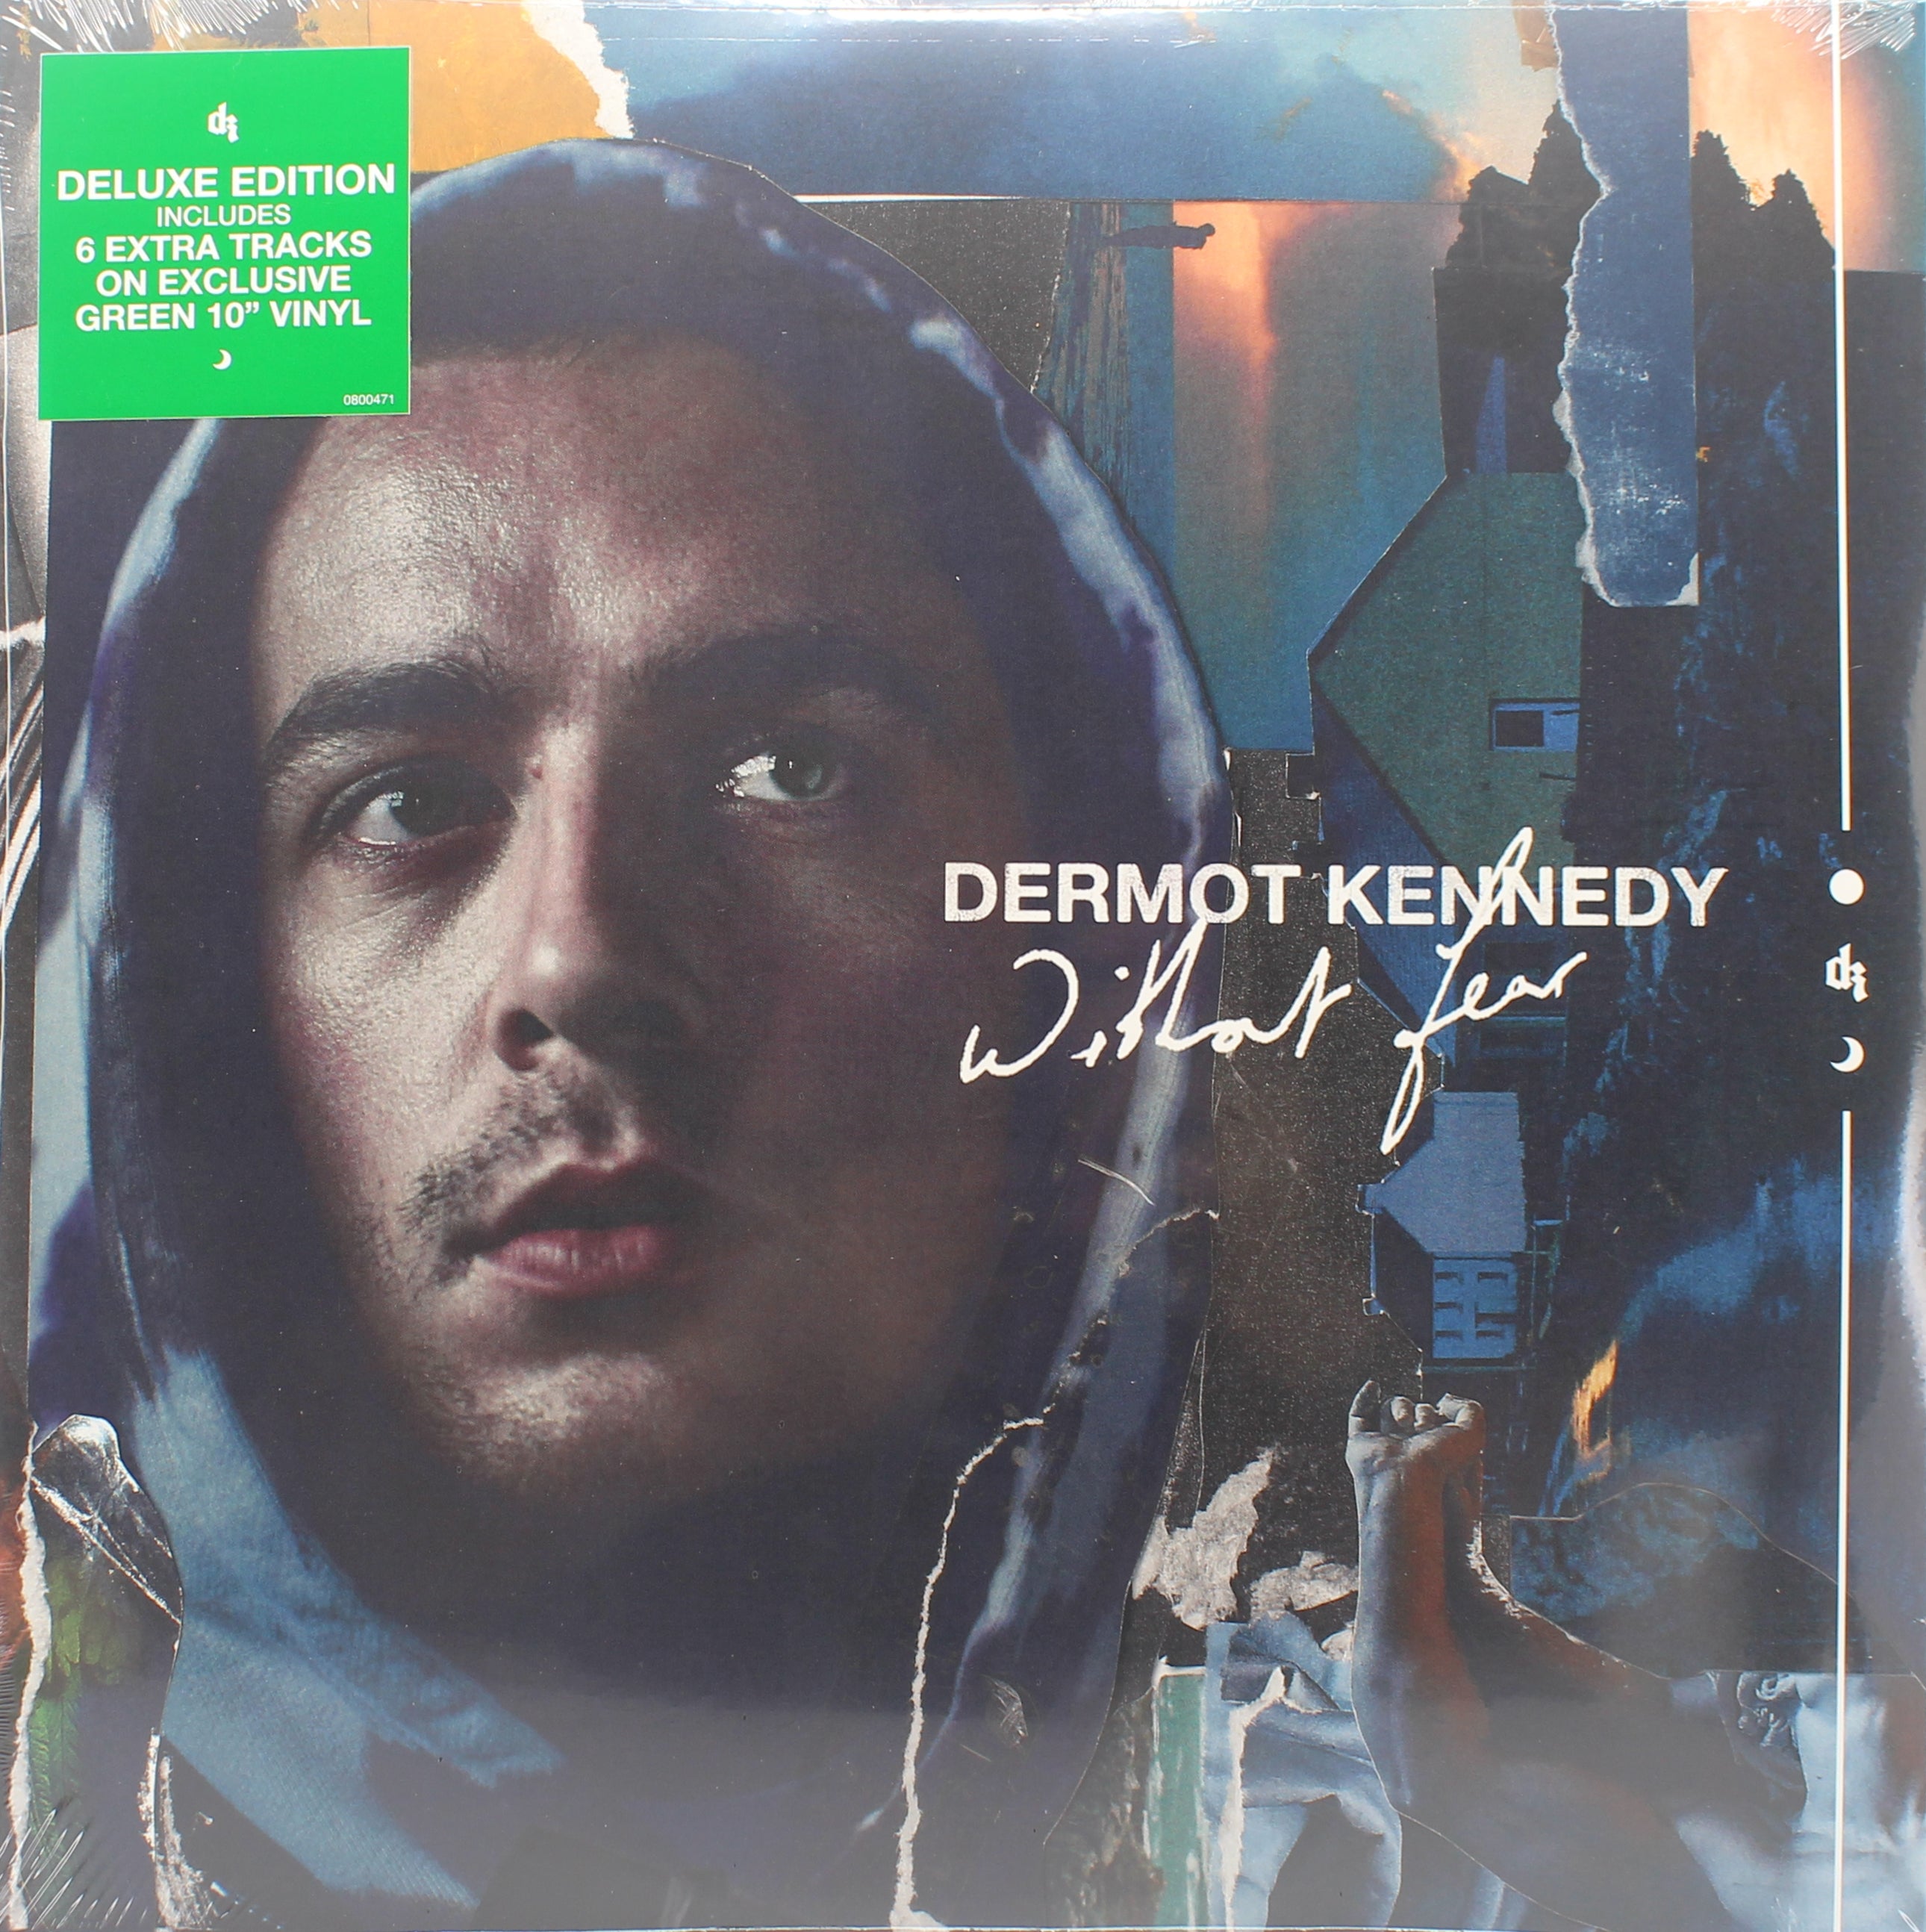 Dermot Kennedy – Without Fear, Vinyl Limited Edition, USA 2019 